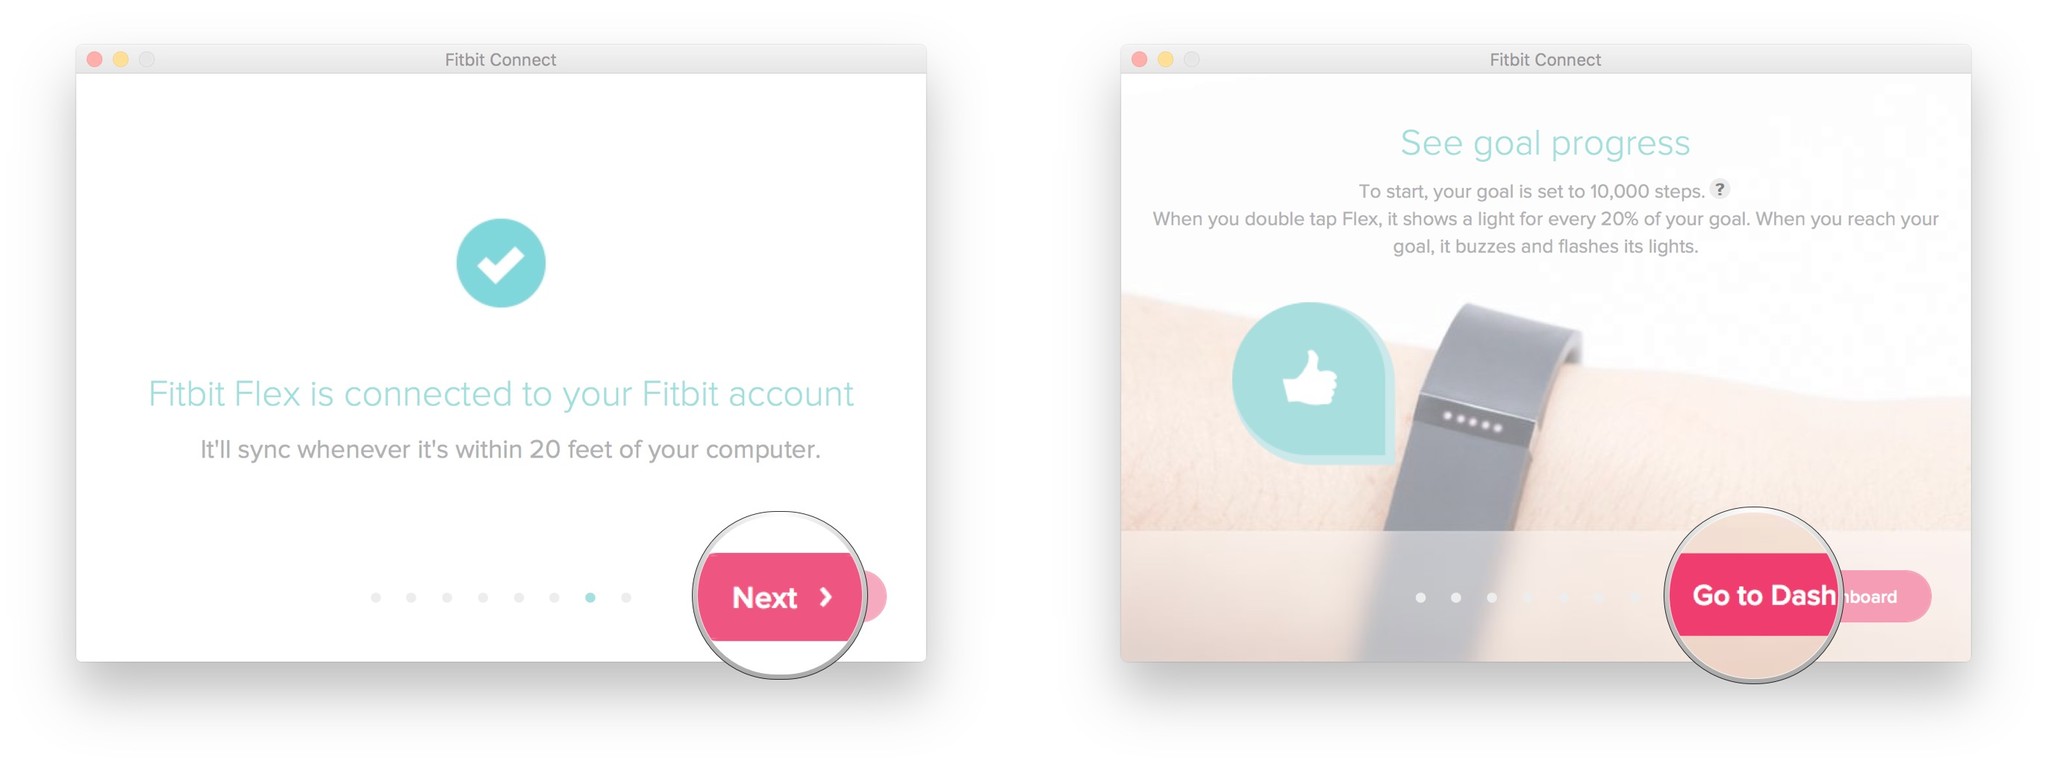 Fitbit connection confirmed screen and button to Fitbit Dashboard